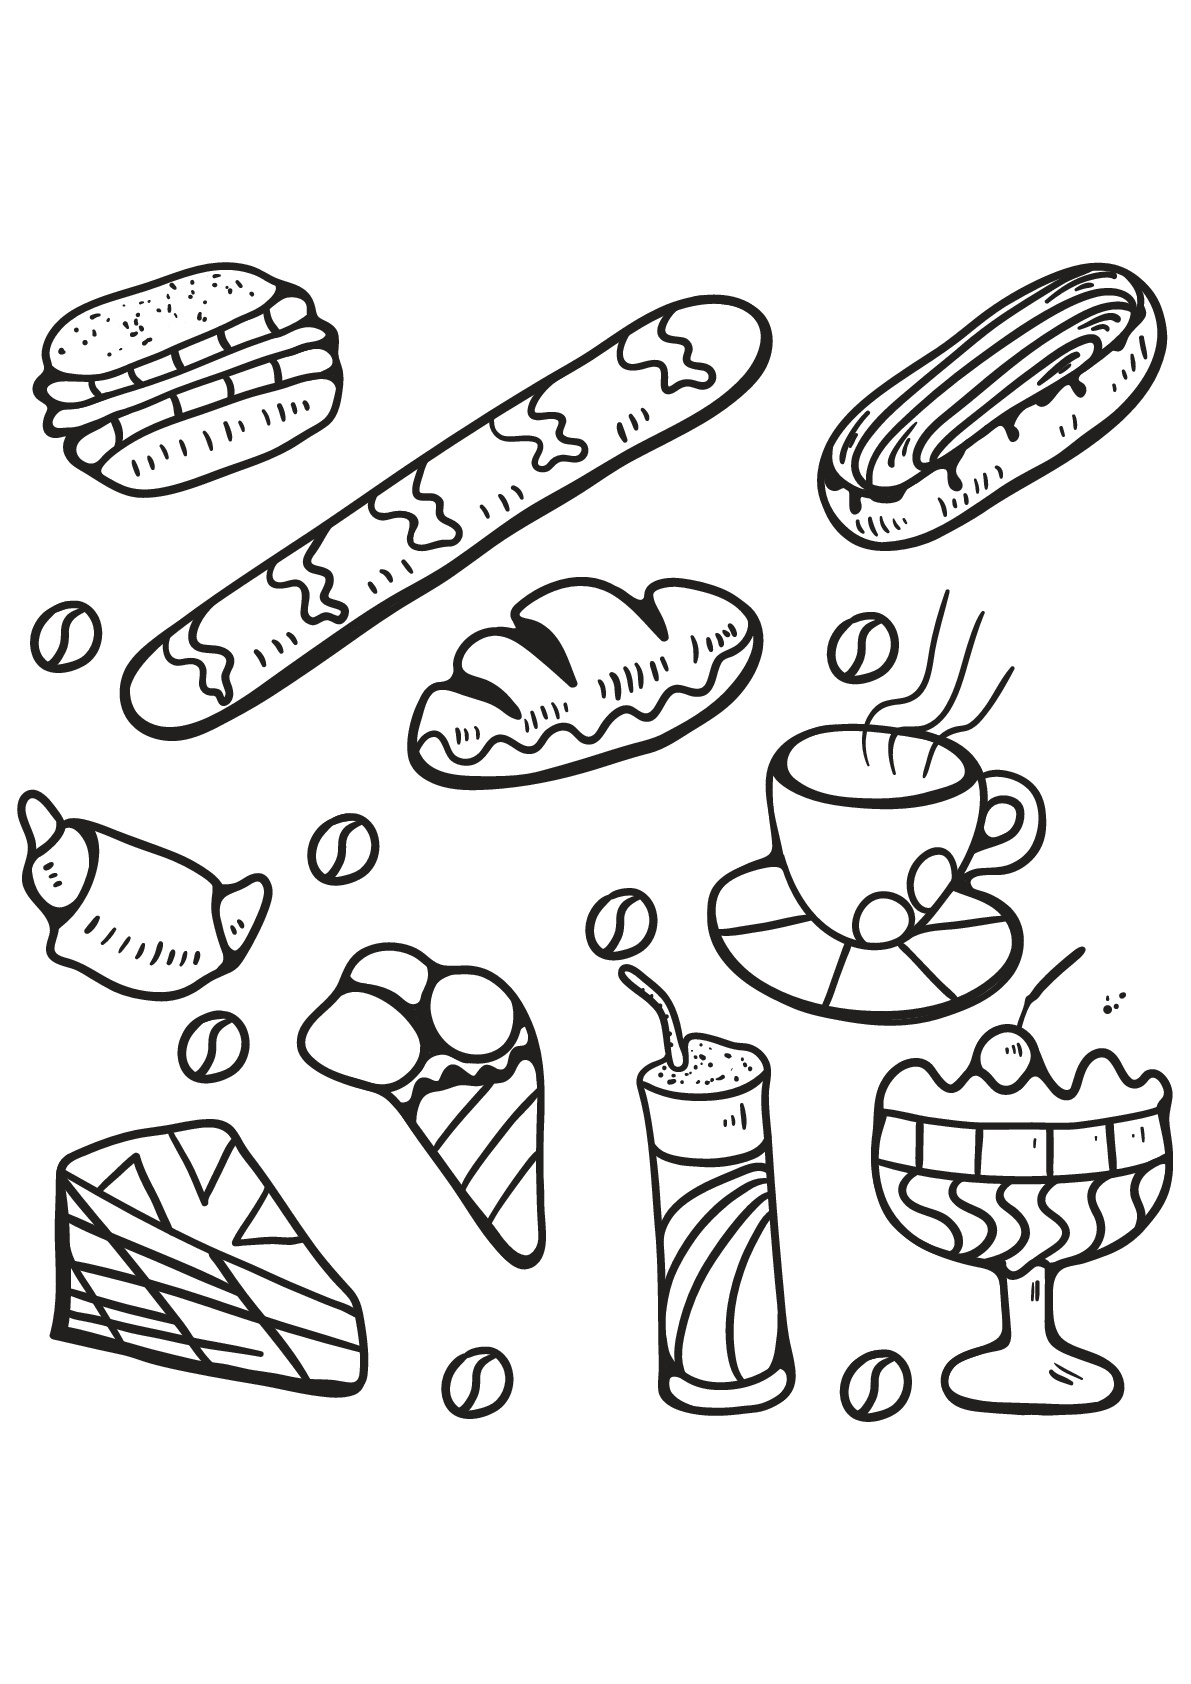 Download Free book cupcake 5 - Cupcakes Adult Coloring Pages